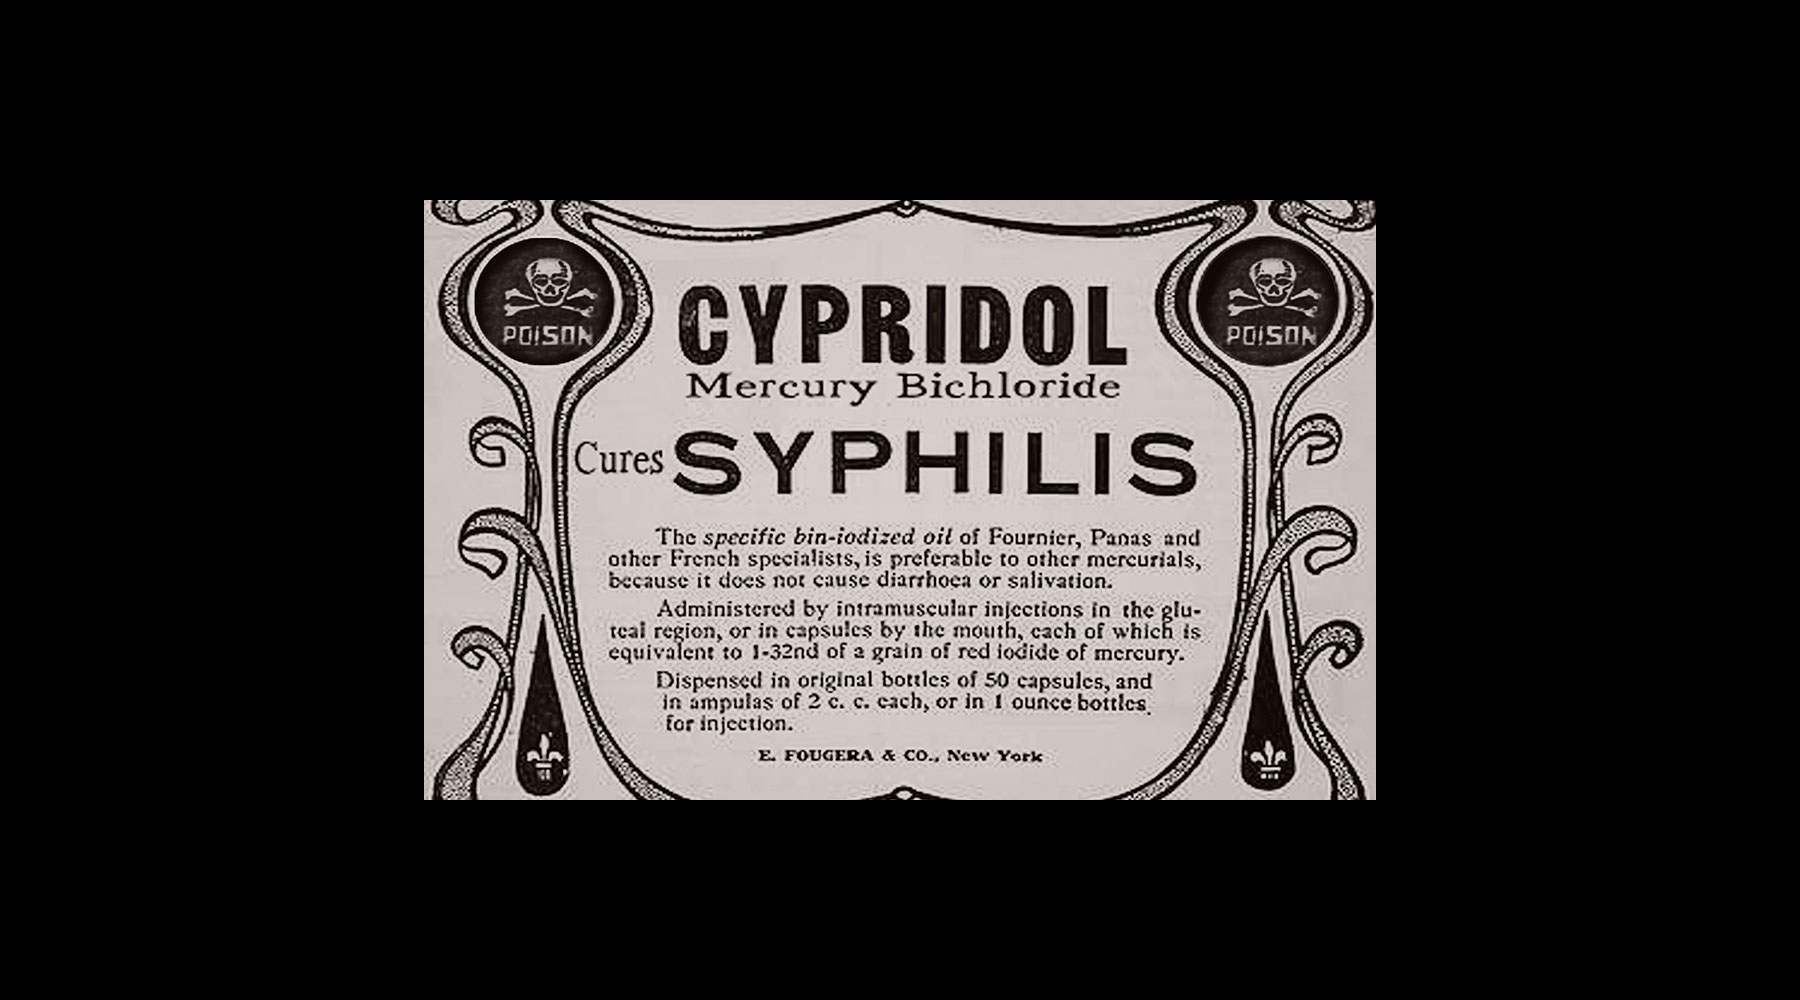 Mercury bichloride was used to treat syphilis. It was also used as a cleaning solution.